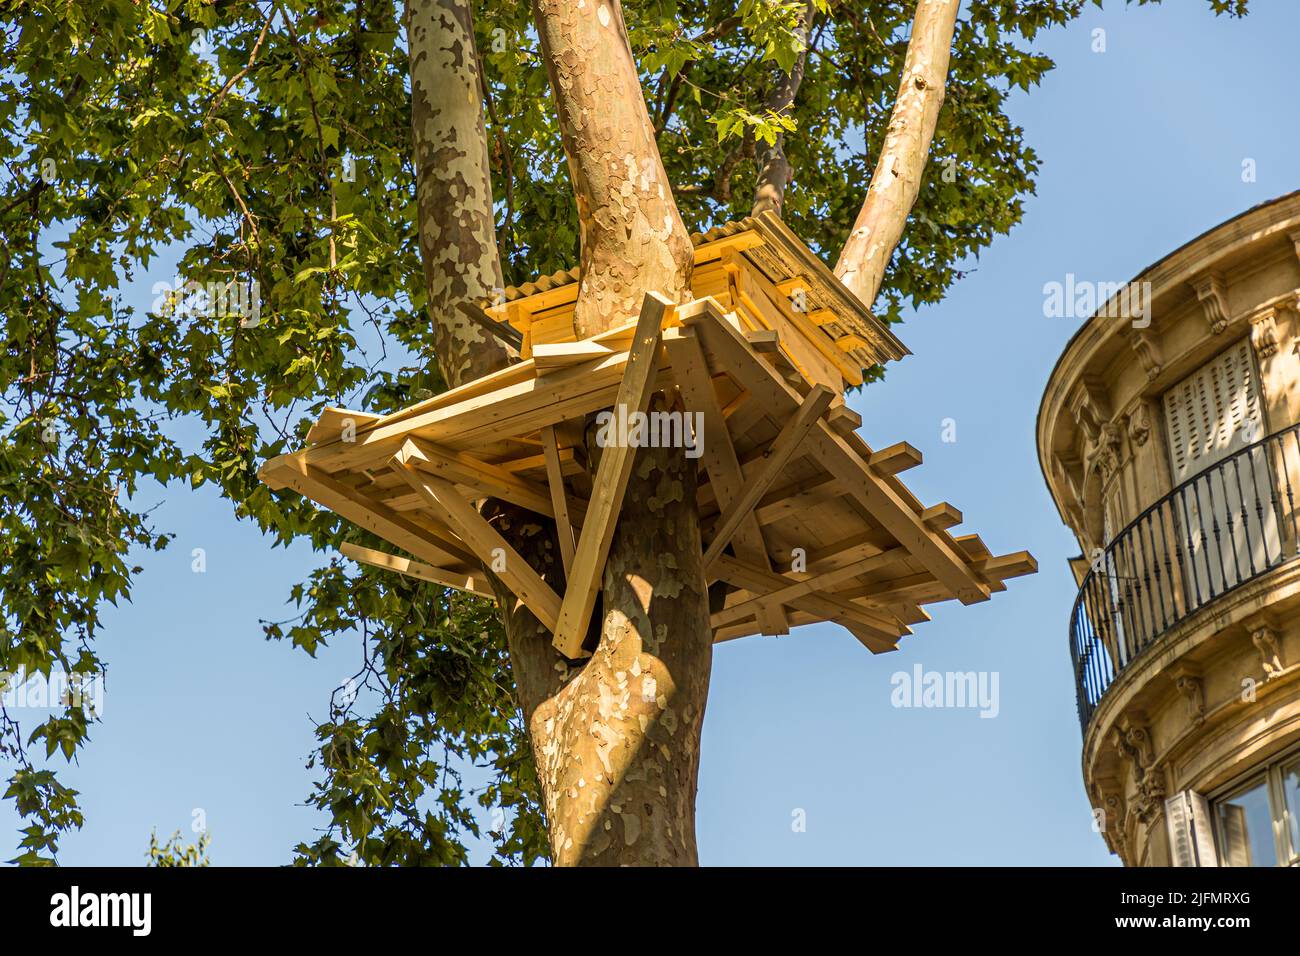 Tree houses by Japanese artist Tadashi Kawamata on the Place de La Canourgue in Montpellier, France Stock Photo